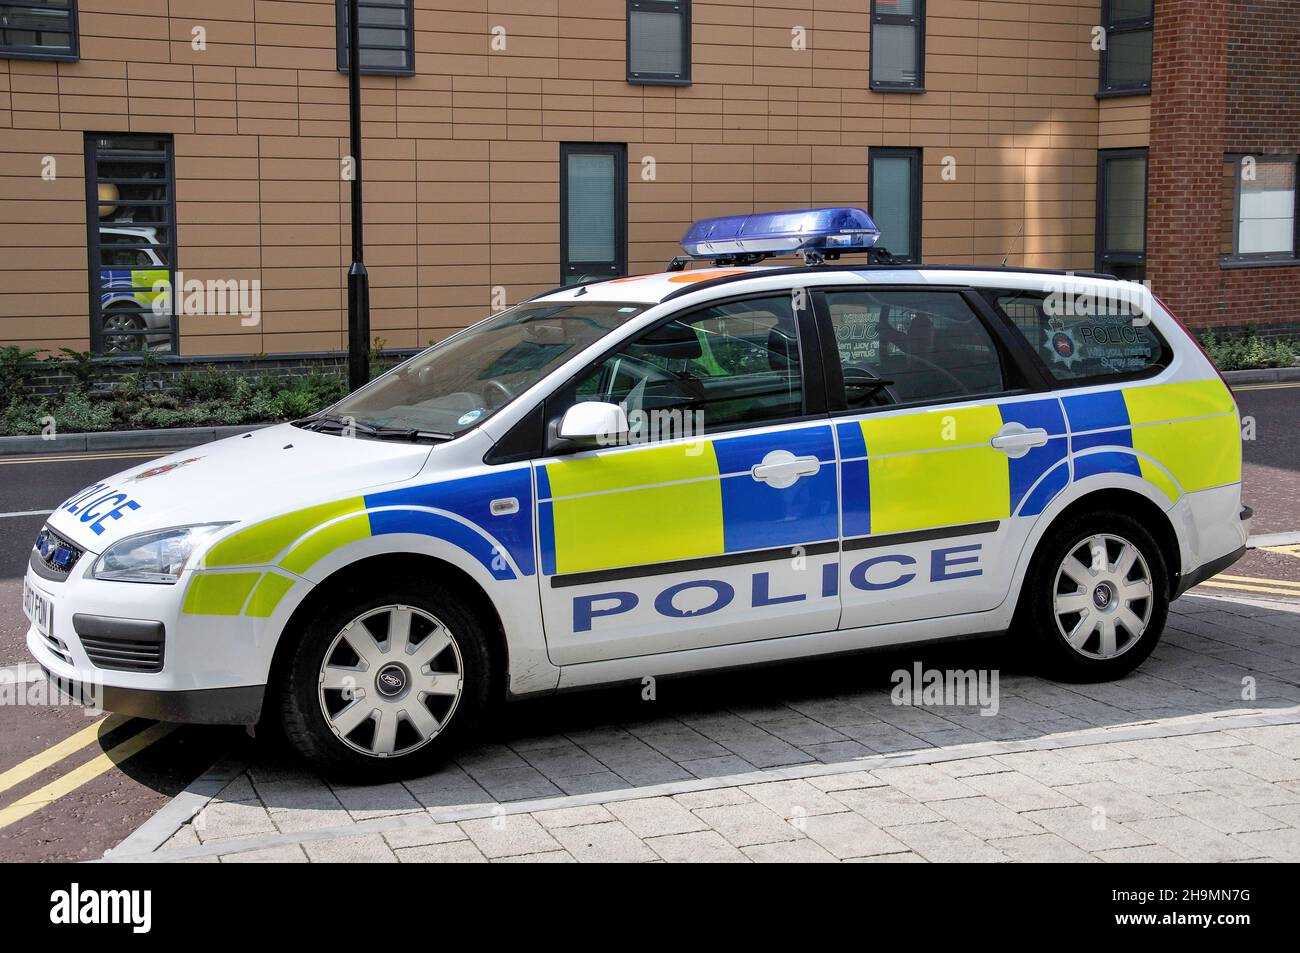 Voiture de police, Camberley, Surrey, Angleterre, Royaume-Uni Banque D'Images